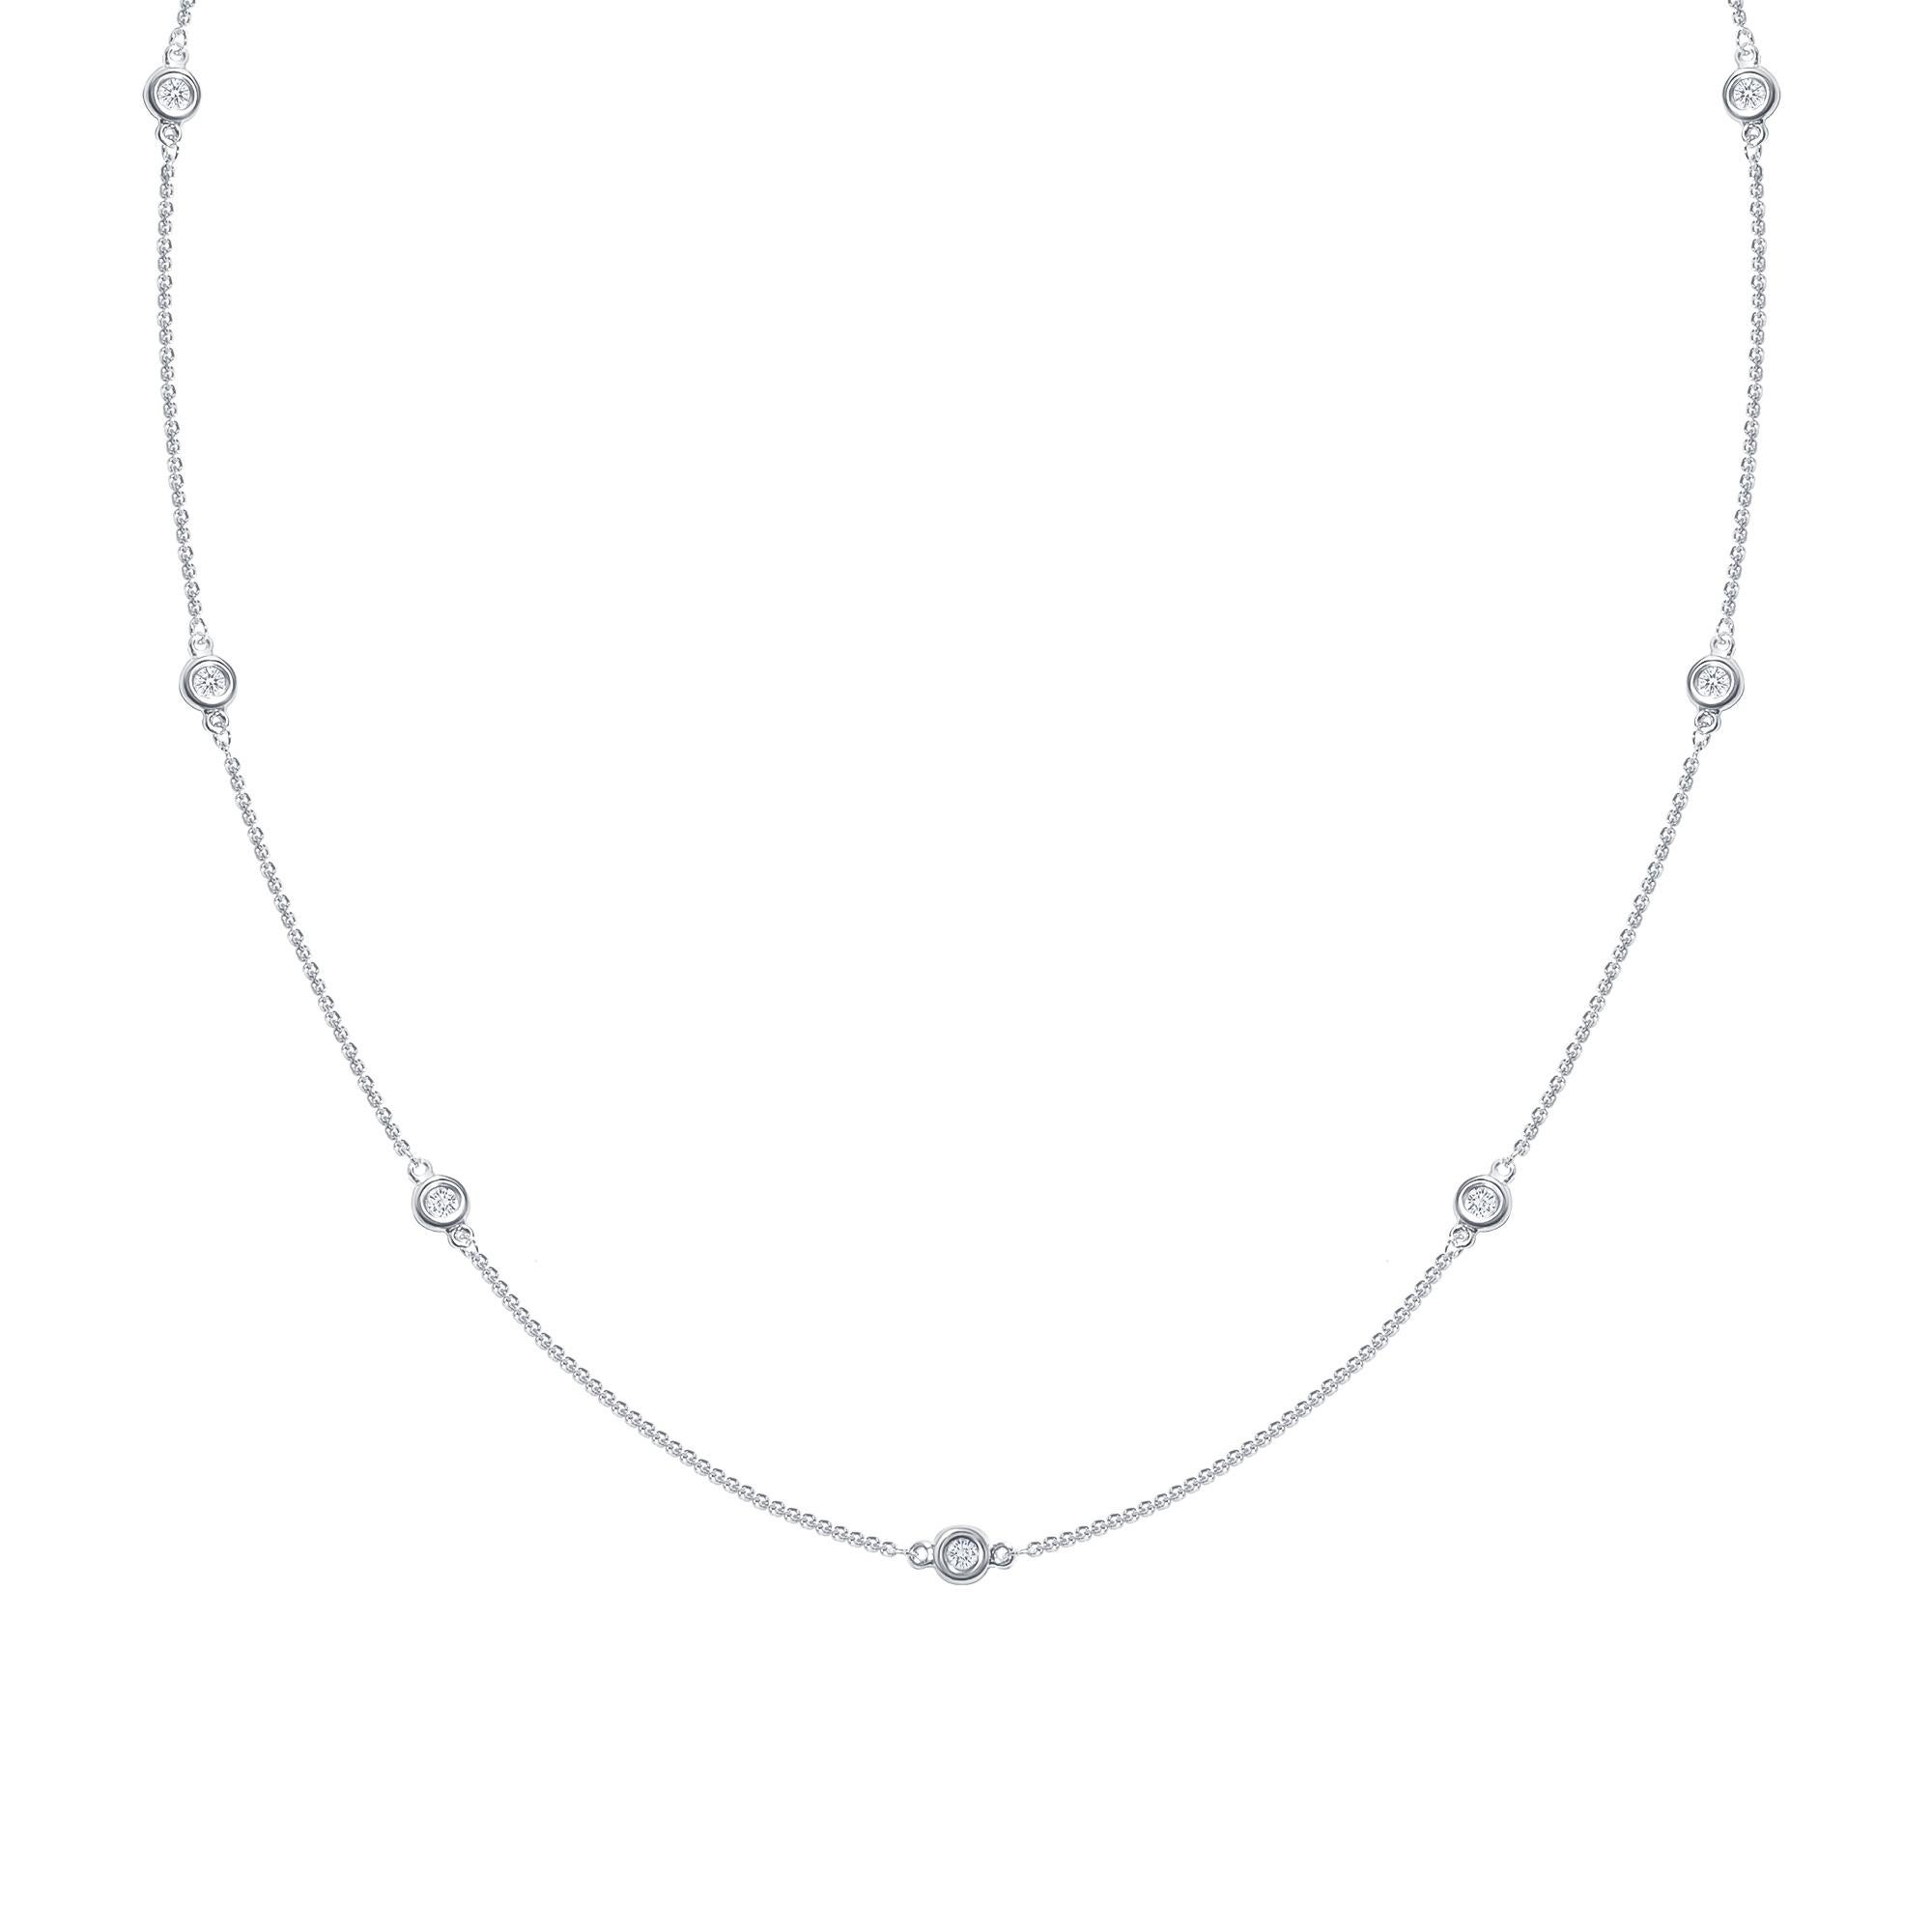 Eight elegant round diamonds set in a bezel setting along a 14k gold chain necklace.

Gold: 14K Gold
Number of Diamonds: Eight
Gold Color: White Gold
Carat: 1.5 Carat
Necklace Length: 16 Inches
Diamond Clarity: VS
Diamond Color: F
Chain Type: